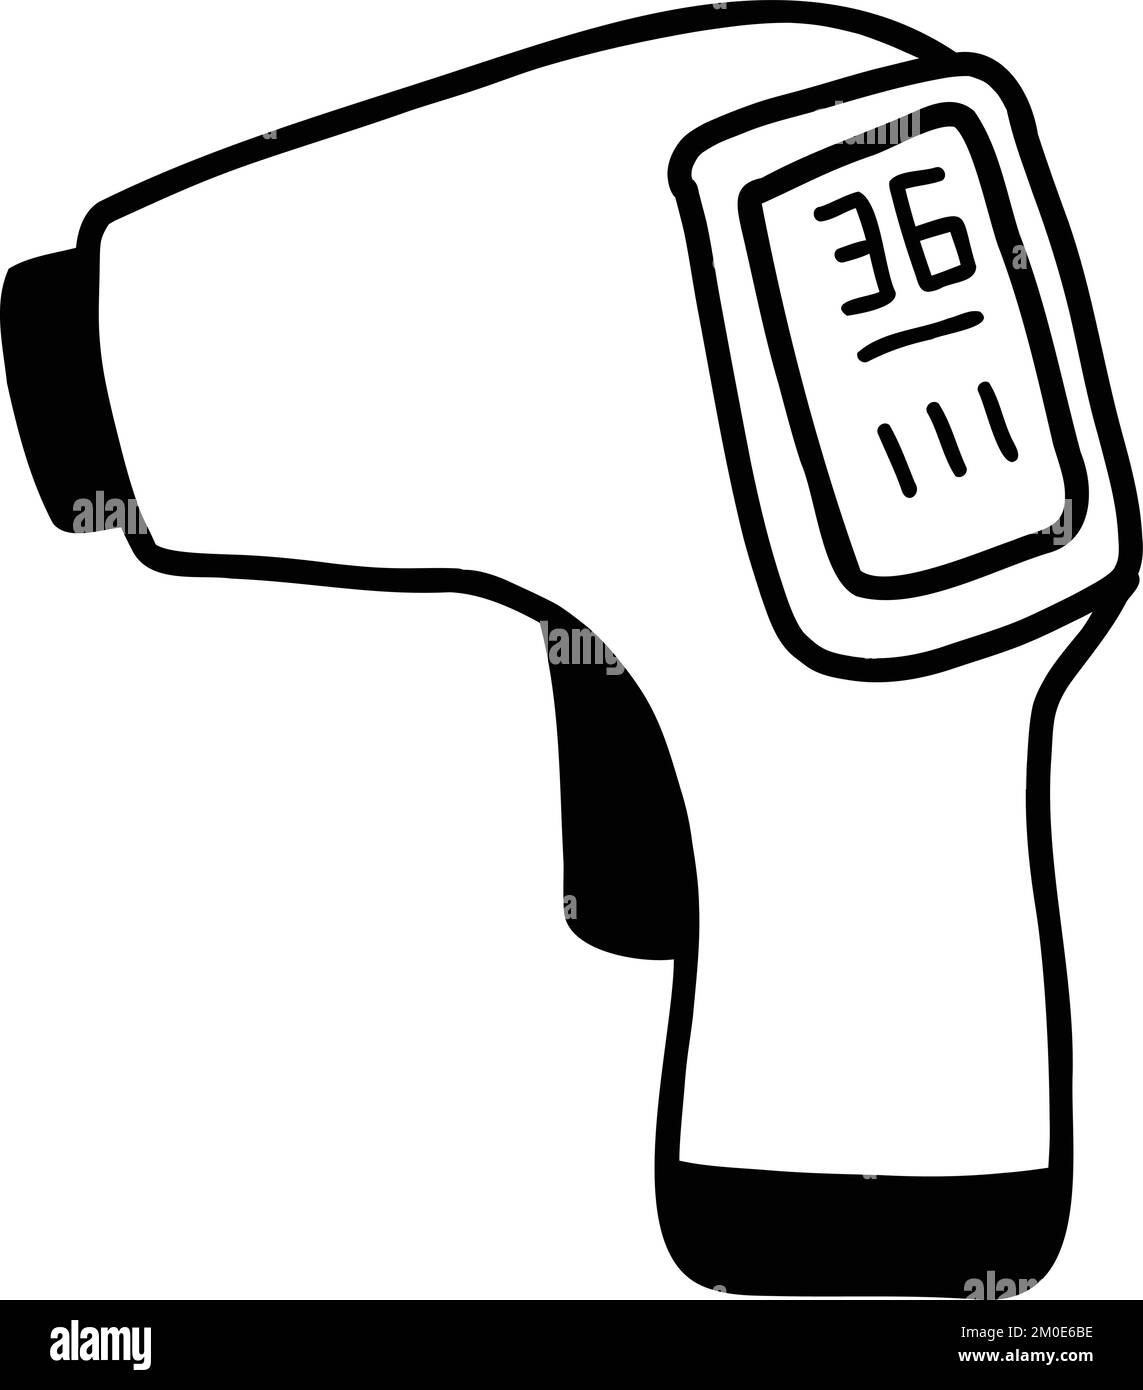 Hand Drawn infrared thermometer illustration isolated on background Stock Vector